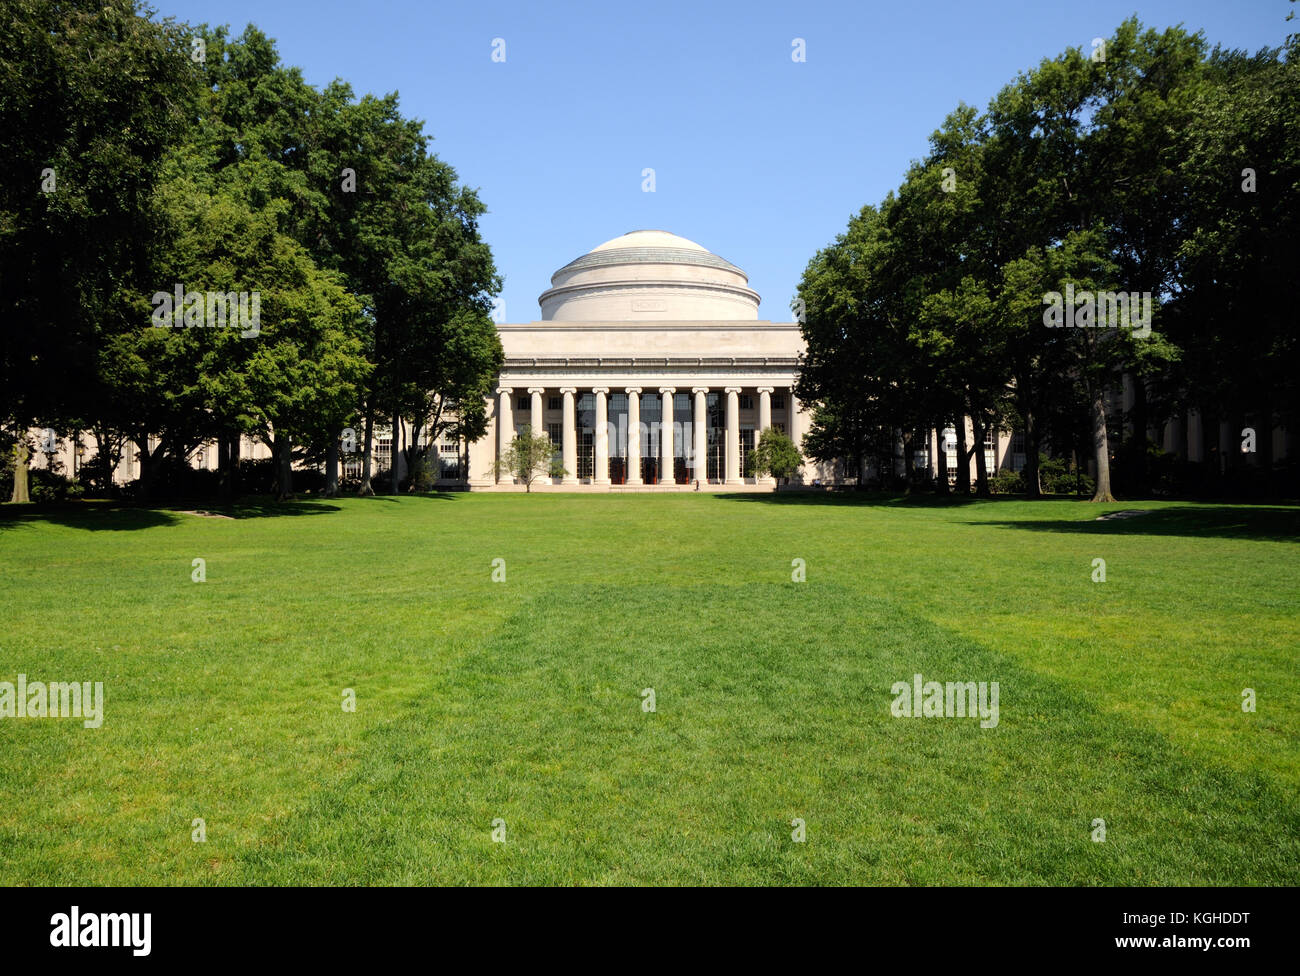 Killian Court and Building 10, with its iconic great dome and classic style colonnade at MIT, Cambridge, Massachusetts Stock Photo